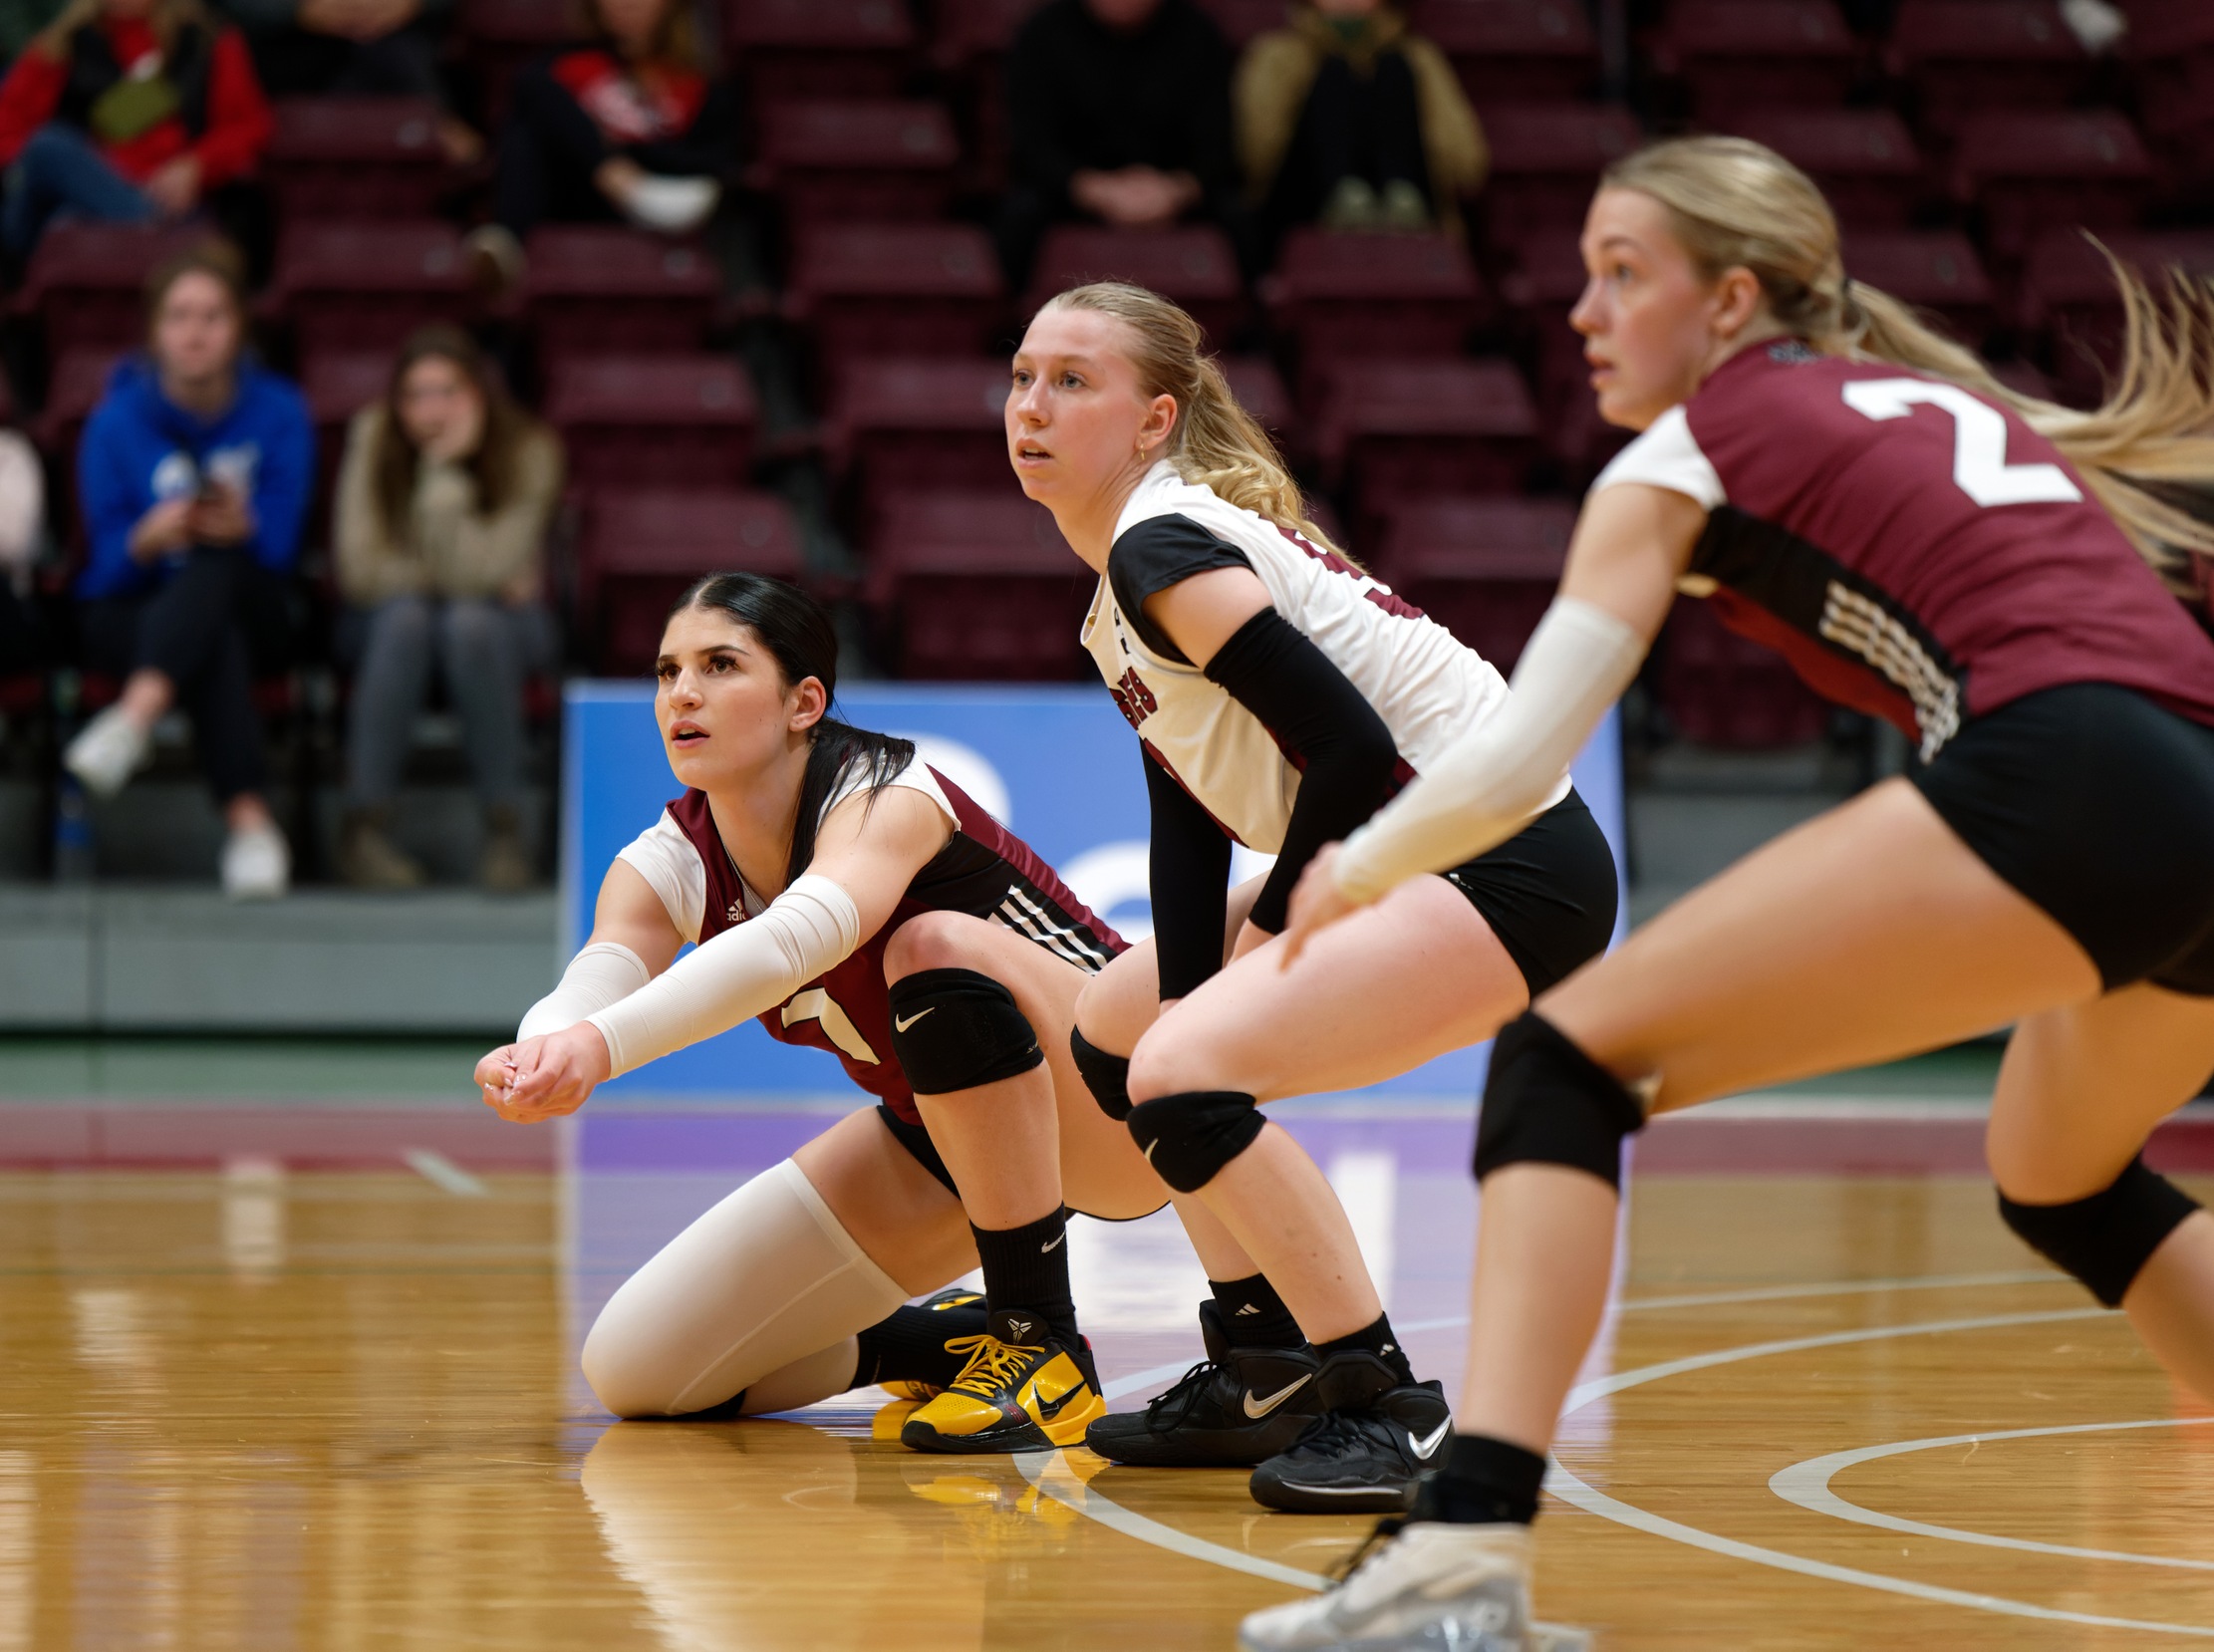 Huskies wrap up AUS League Tournament with win over Sea-Hawks